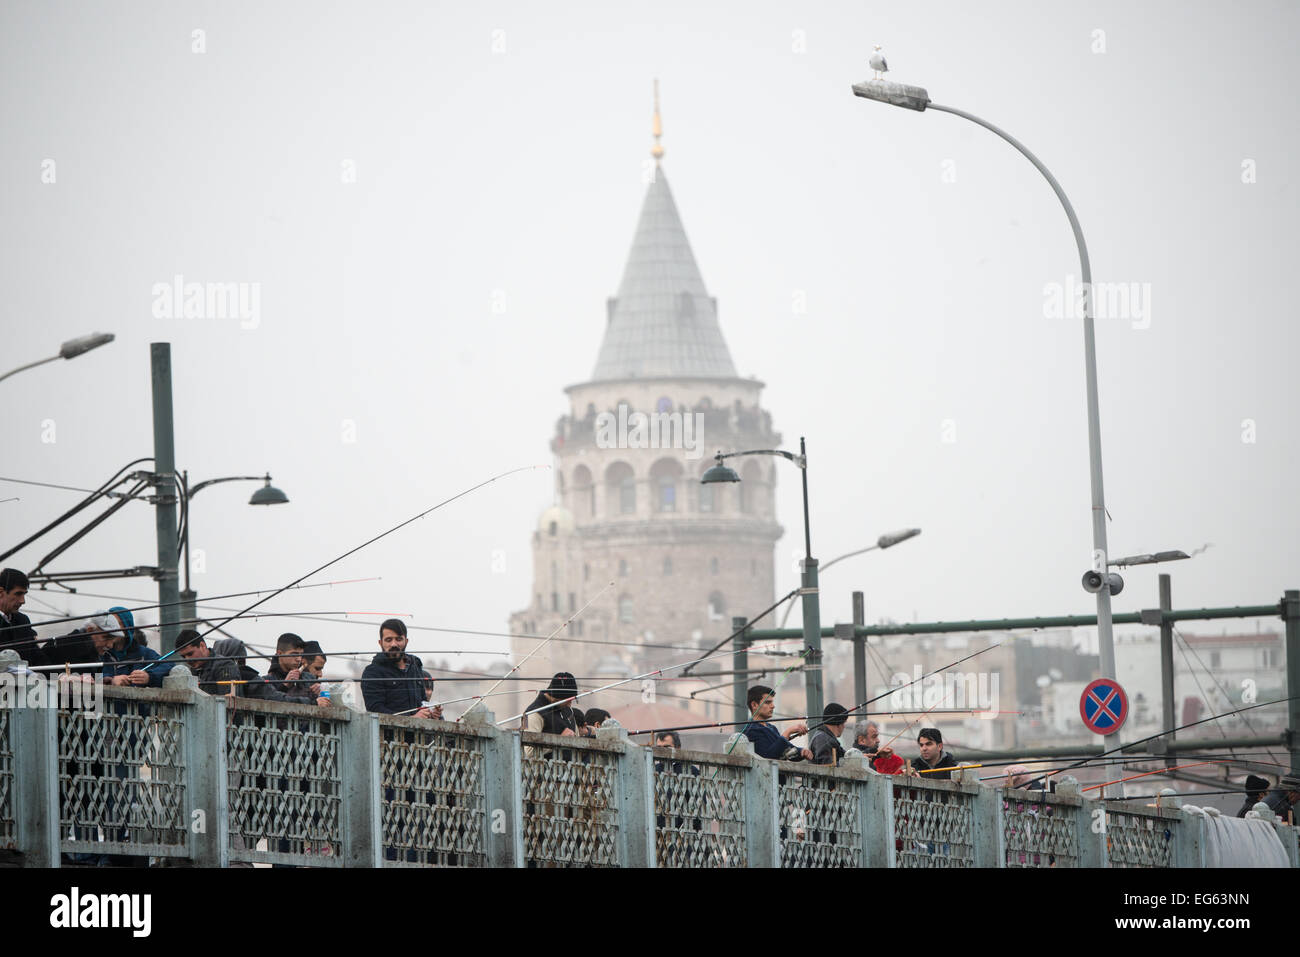 ISTANBUL, Turkey — ISTANBUL, Turkey — Fishermen line the Galata Bridge, with the Galata Tower in the background. A historic area with a rich Ottoman past, Eminonu is the heart of old Istanbul, where traders and tourists merge in a colorful spectacle of cultural exchange. Stock Photo